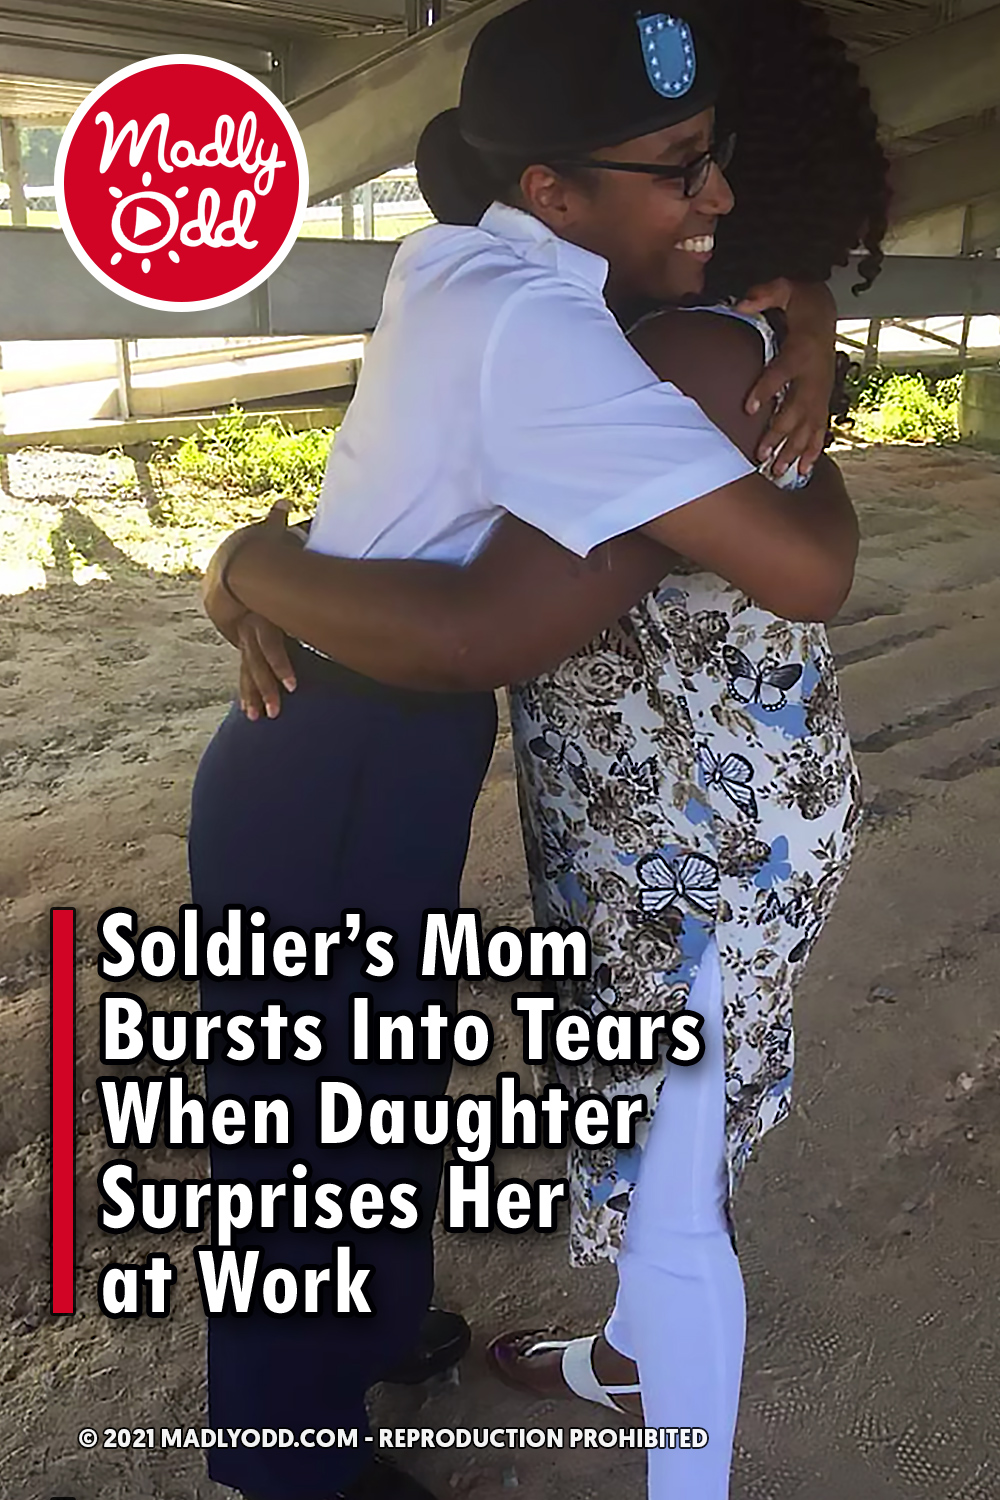 Soldier’s Mom Bursts Into Tears When Daughter Surprises Her at Work